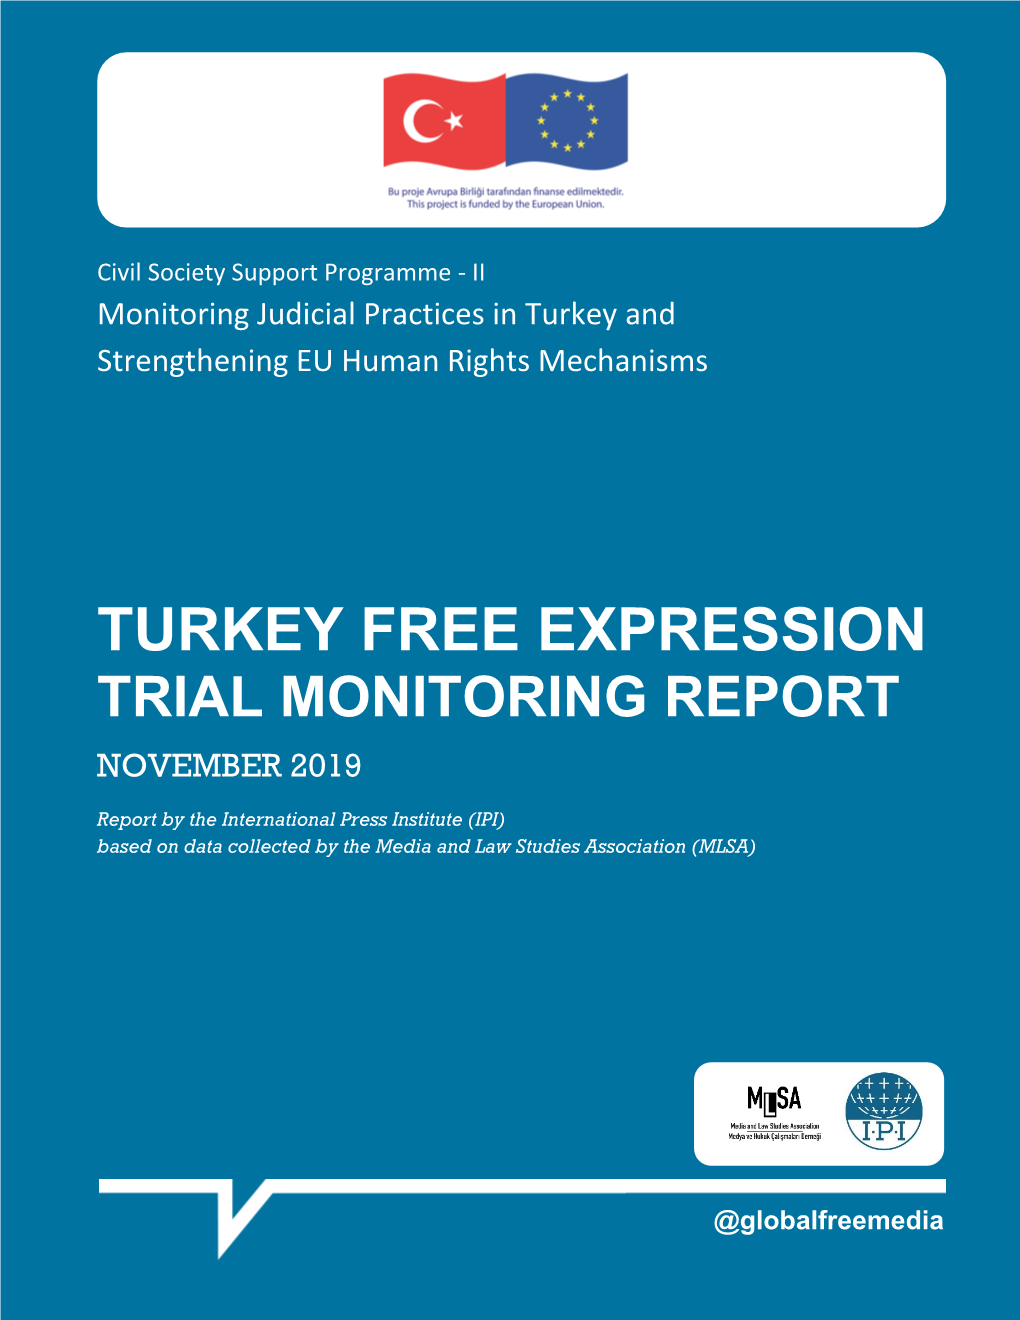 Turkey Free Expression Trial Monitoring Report November 2019